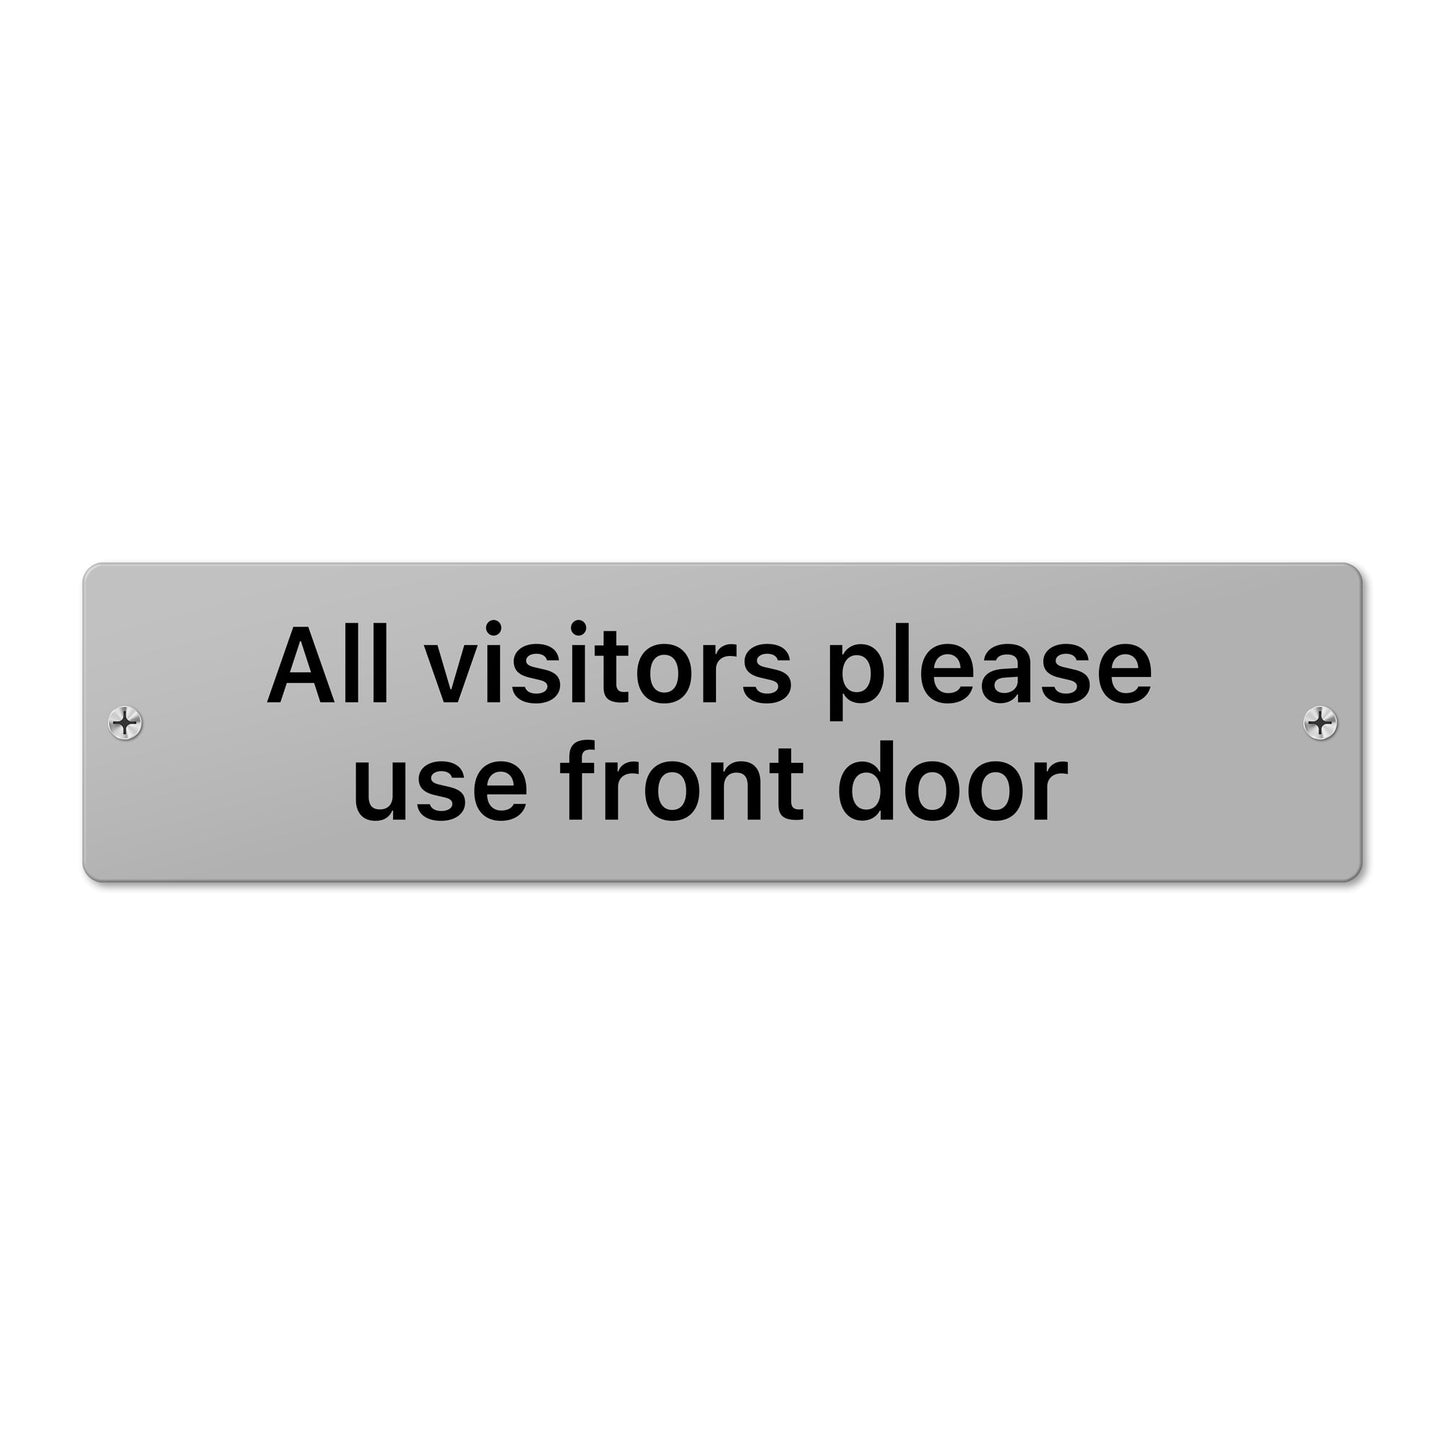 All visitors please use front door